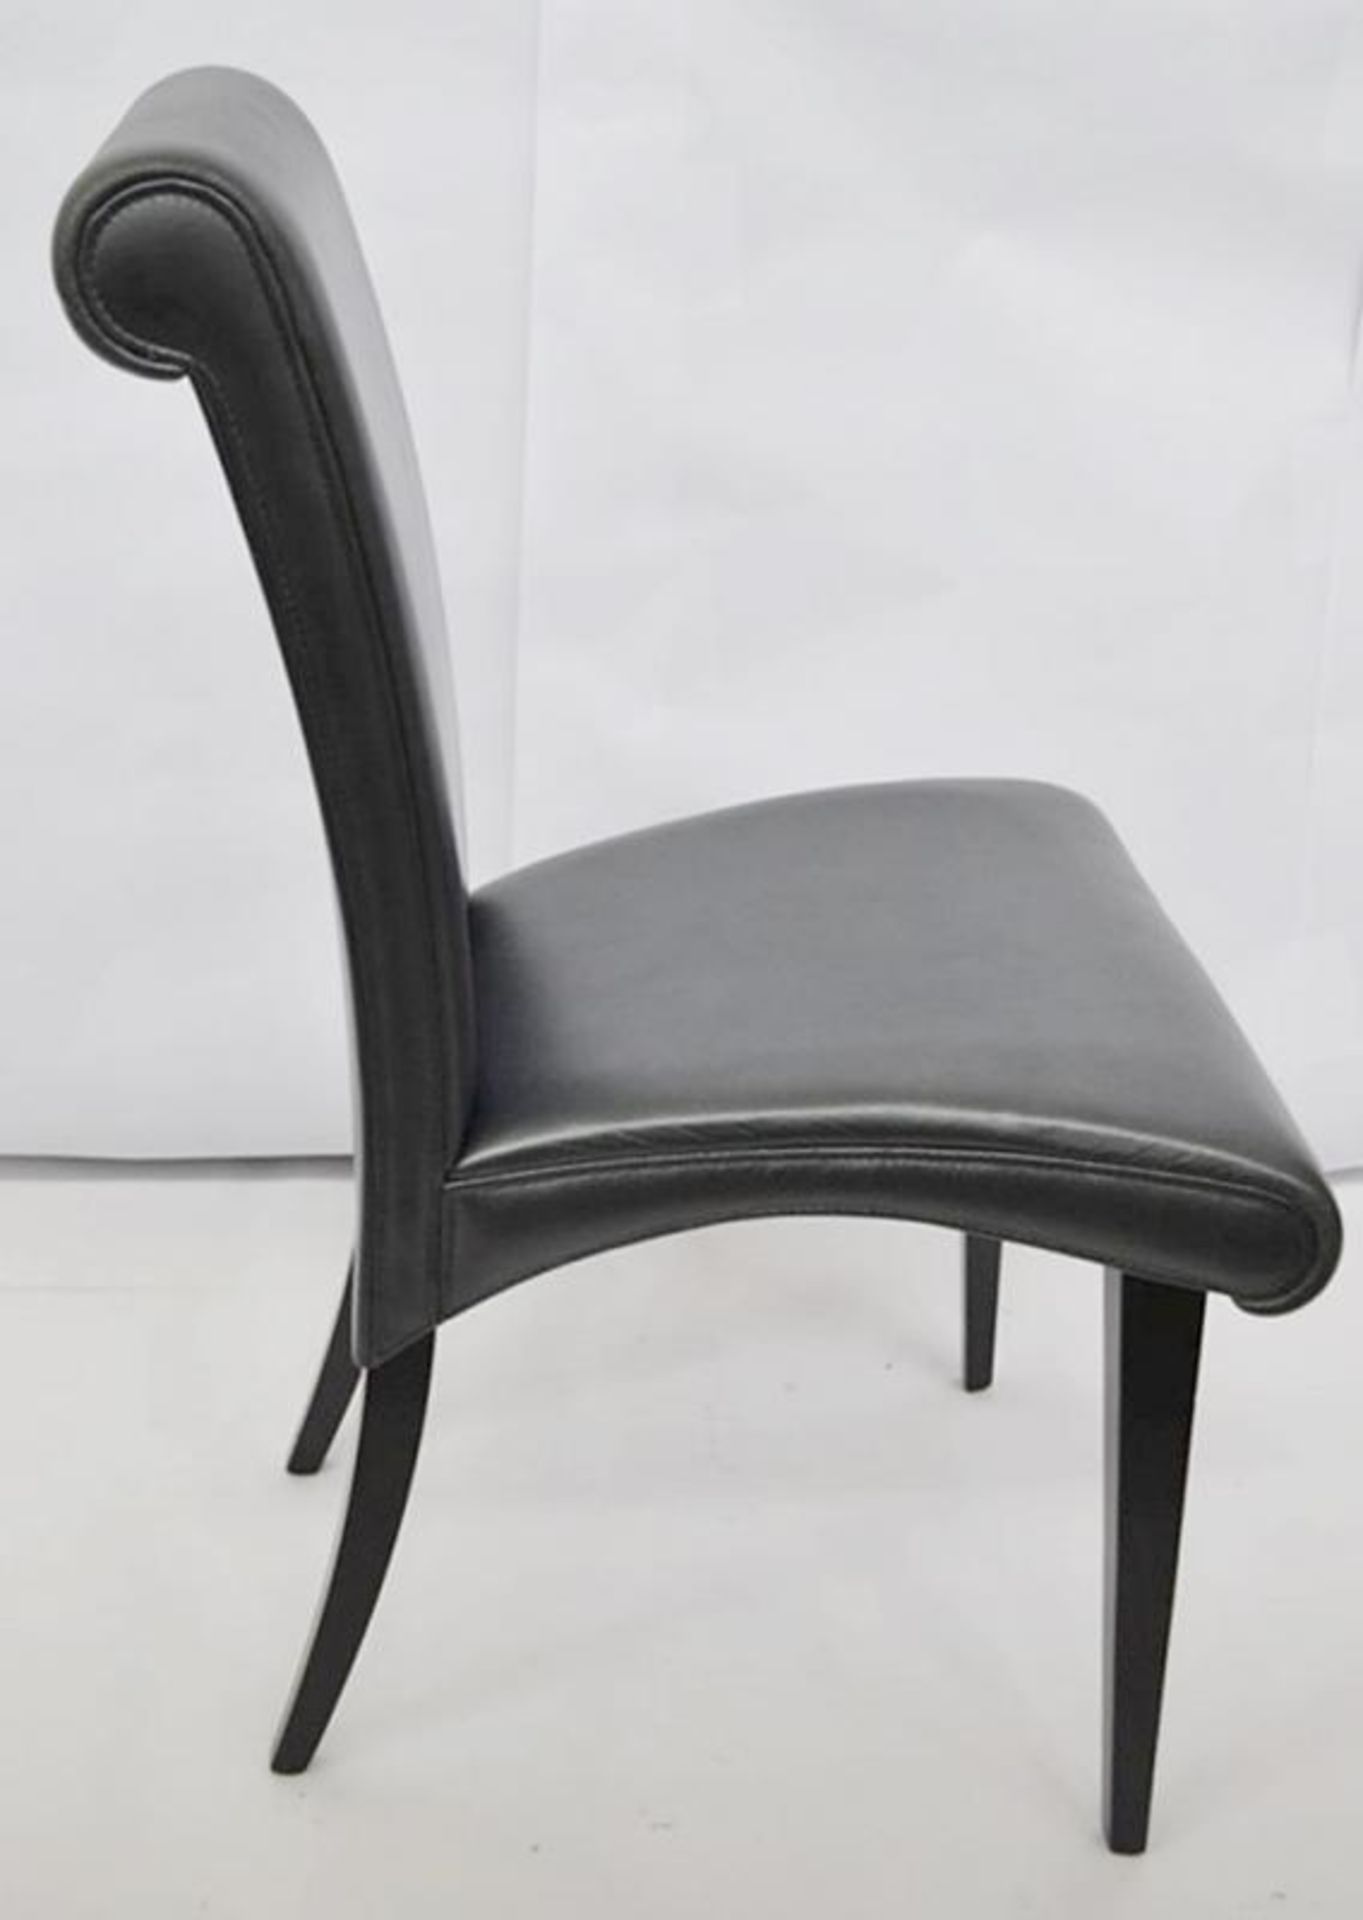 1 x CATTALAN “Lulu” High Back Chair – Upholstered In A Rich Metallic Charcoal - Dimensions: W50 x H9 - Image 4 of 8